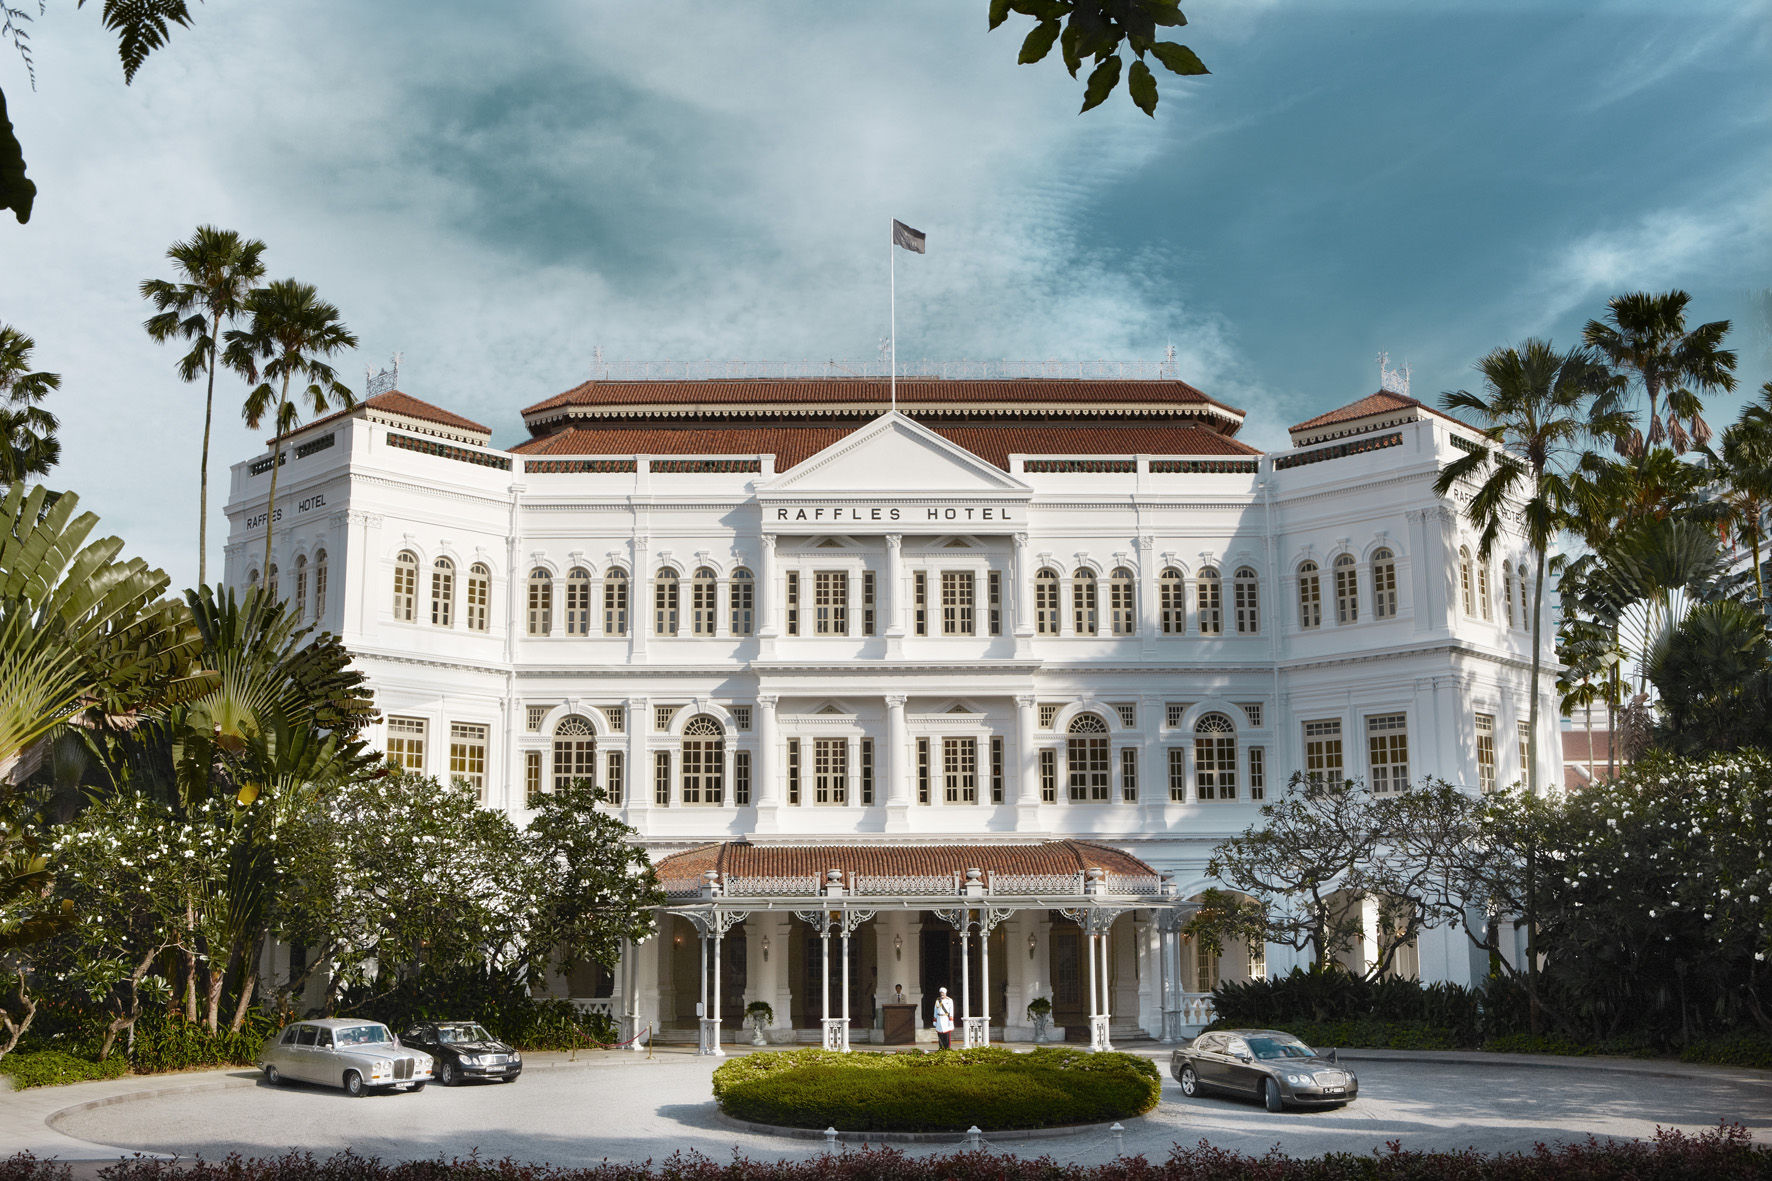 3 things to anticipate with the new Raffles Hotel Singapore